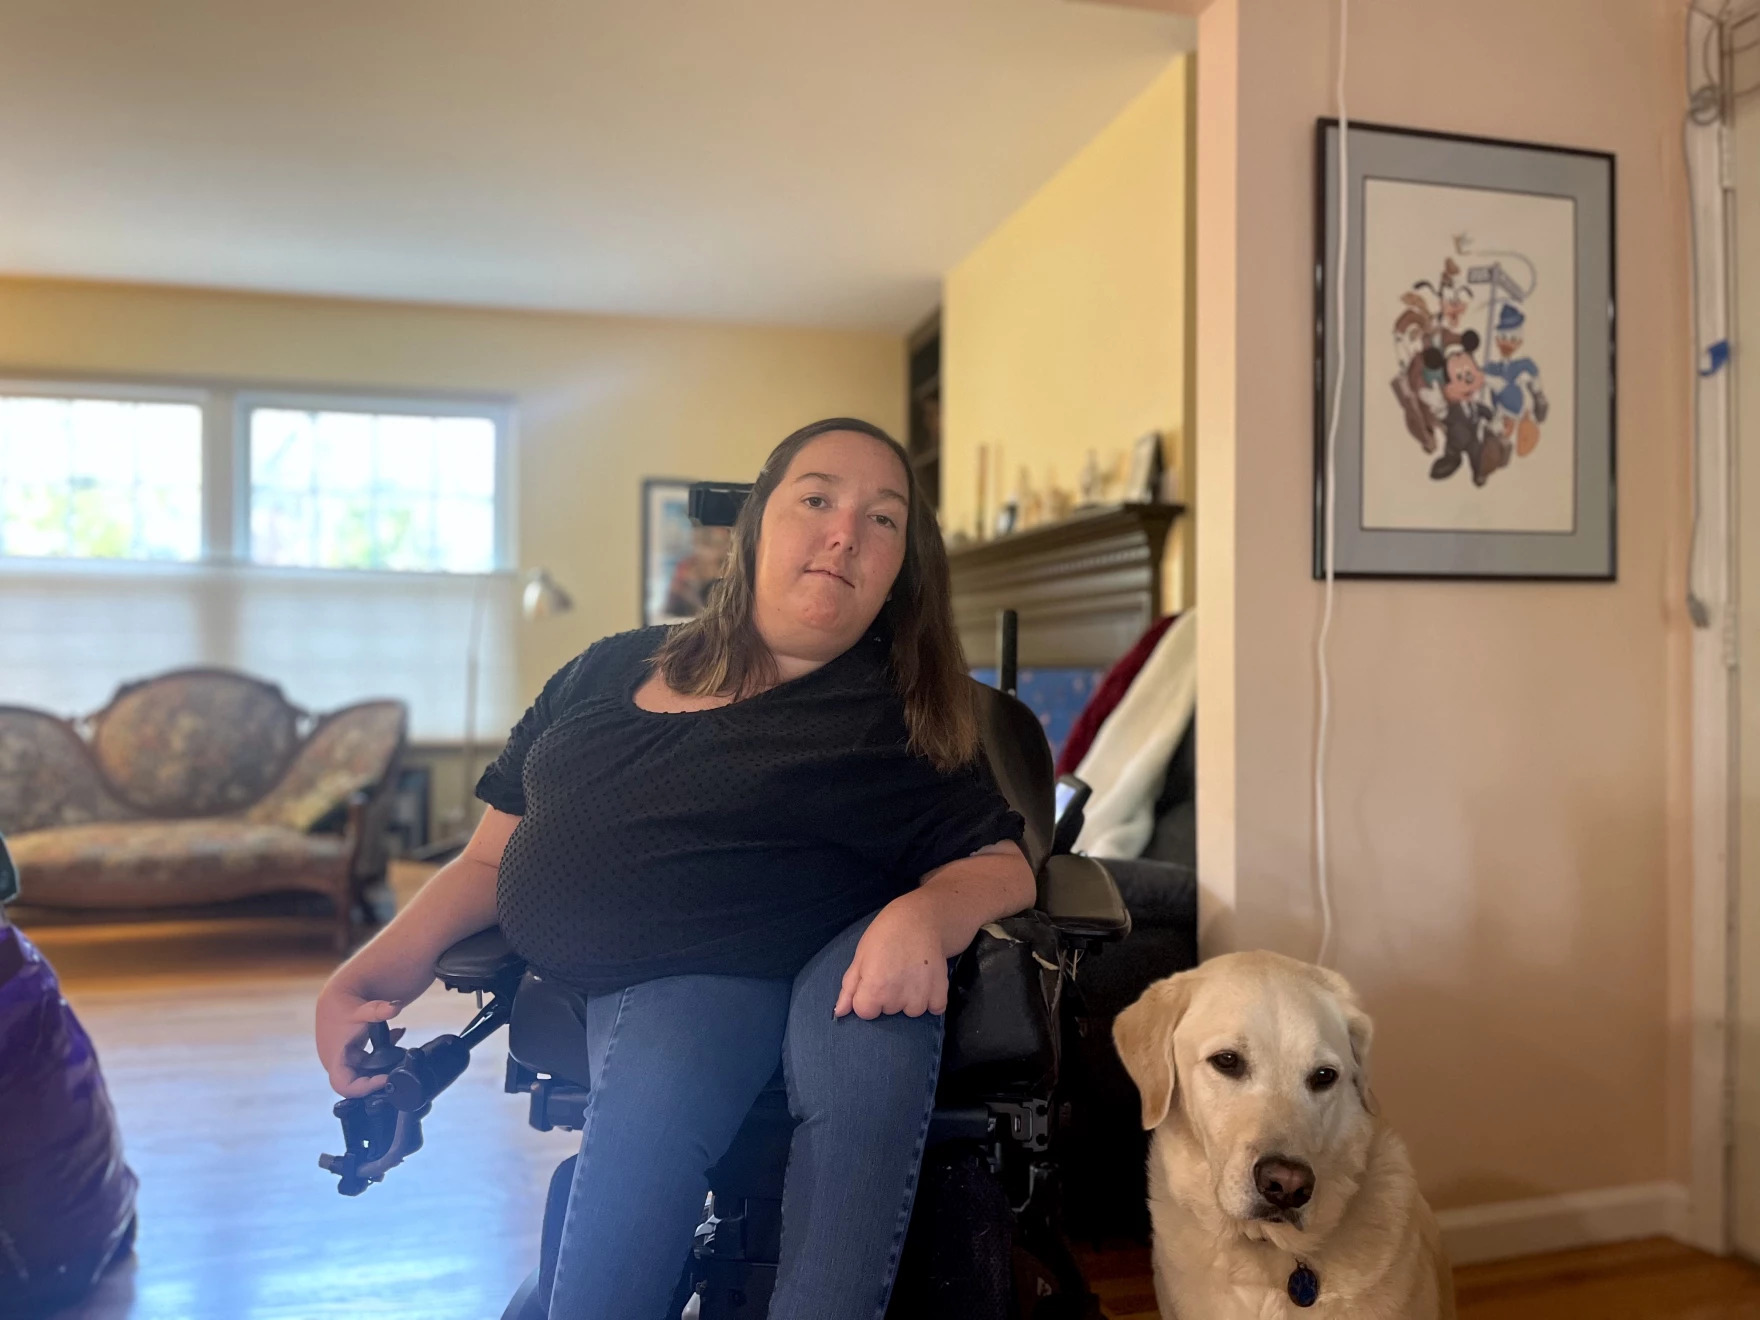 A photo shows Emily Munson in a wheelchair at home. A dog is sitting beside her.